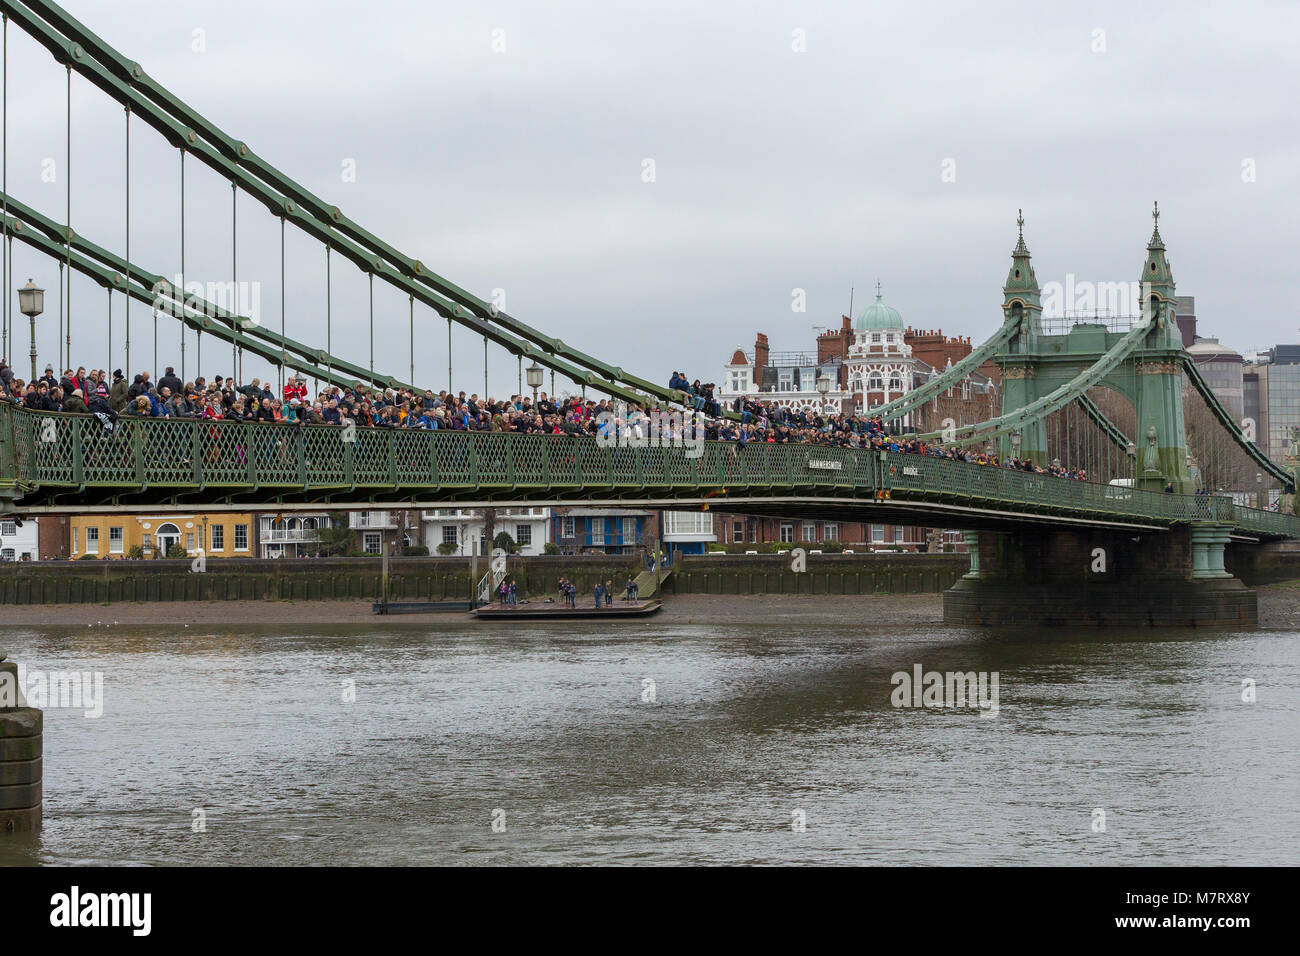 LONDON, 10 MARCH 2018: Spectators on Hammersmith Bridge waiting to watch the Womens Head of the River Race WEHORR 2018 on the River Thames, London, England UK Stock Photo